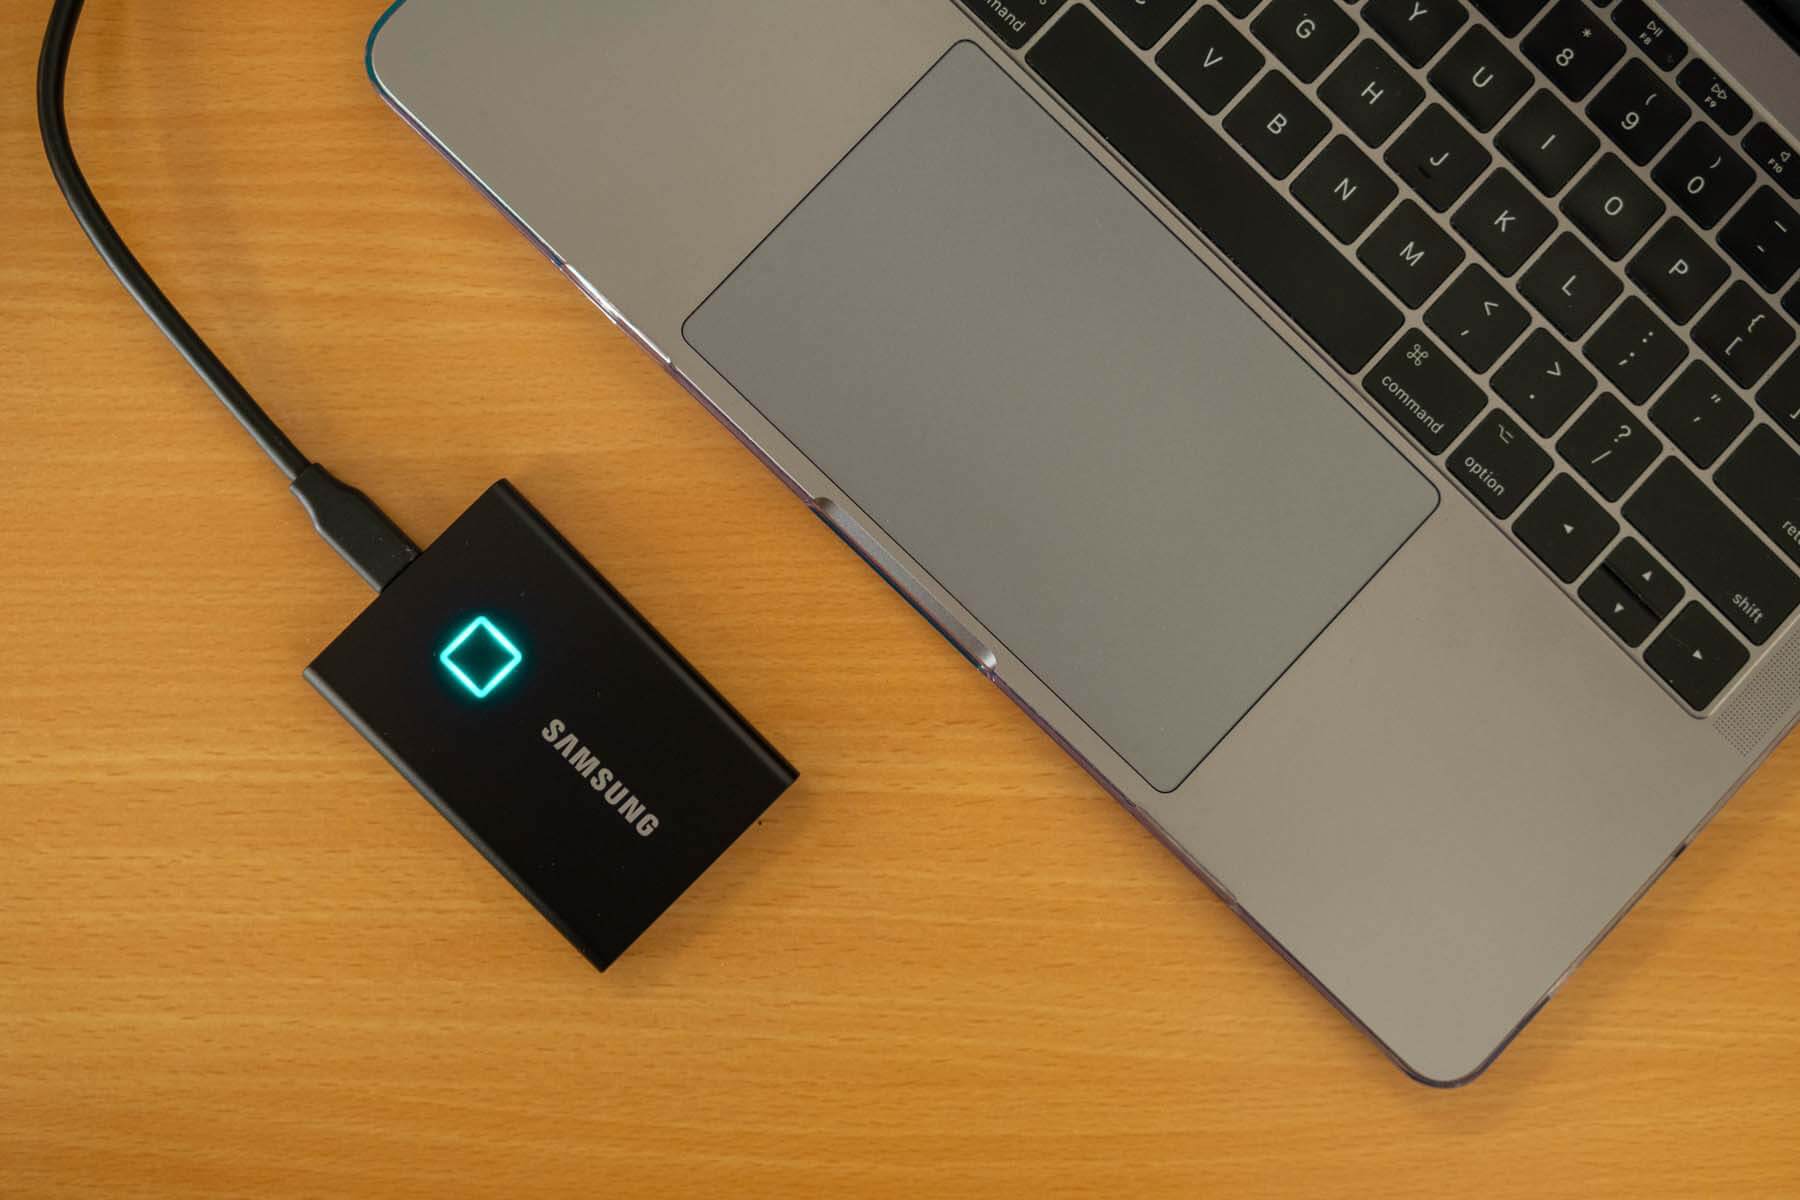 Samsung Portable SSD T7 Touch on desk next to laptop